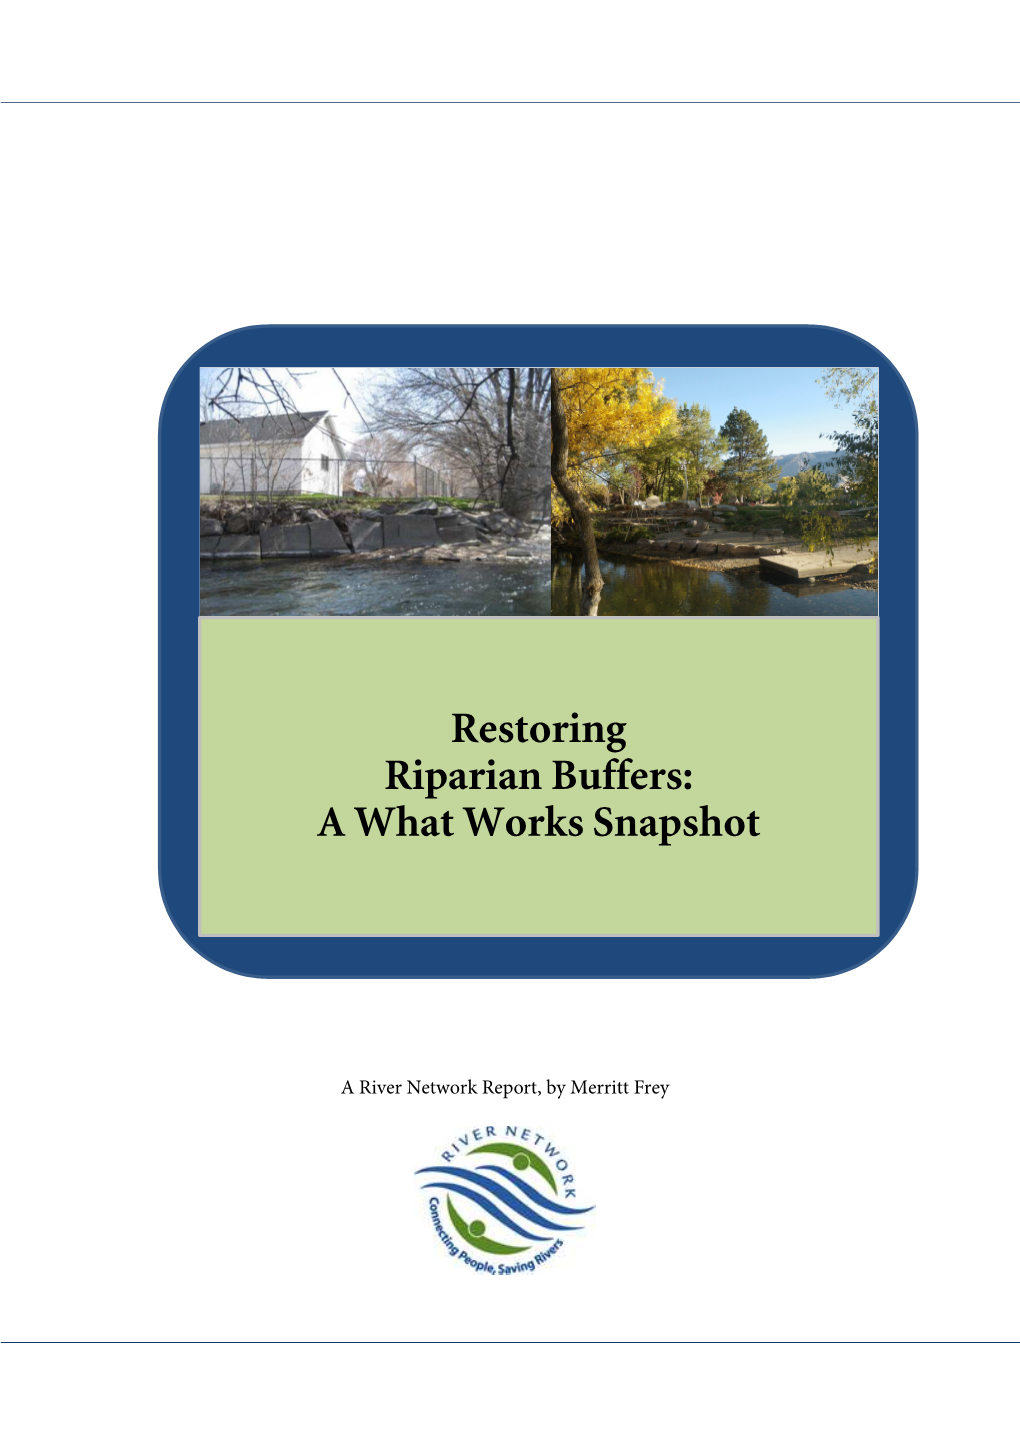 Restoring Riparian Buffers: a What Works Snapshot